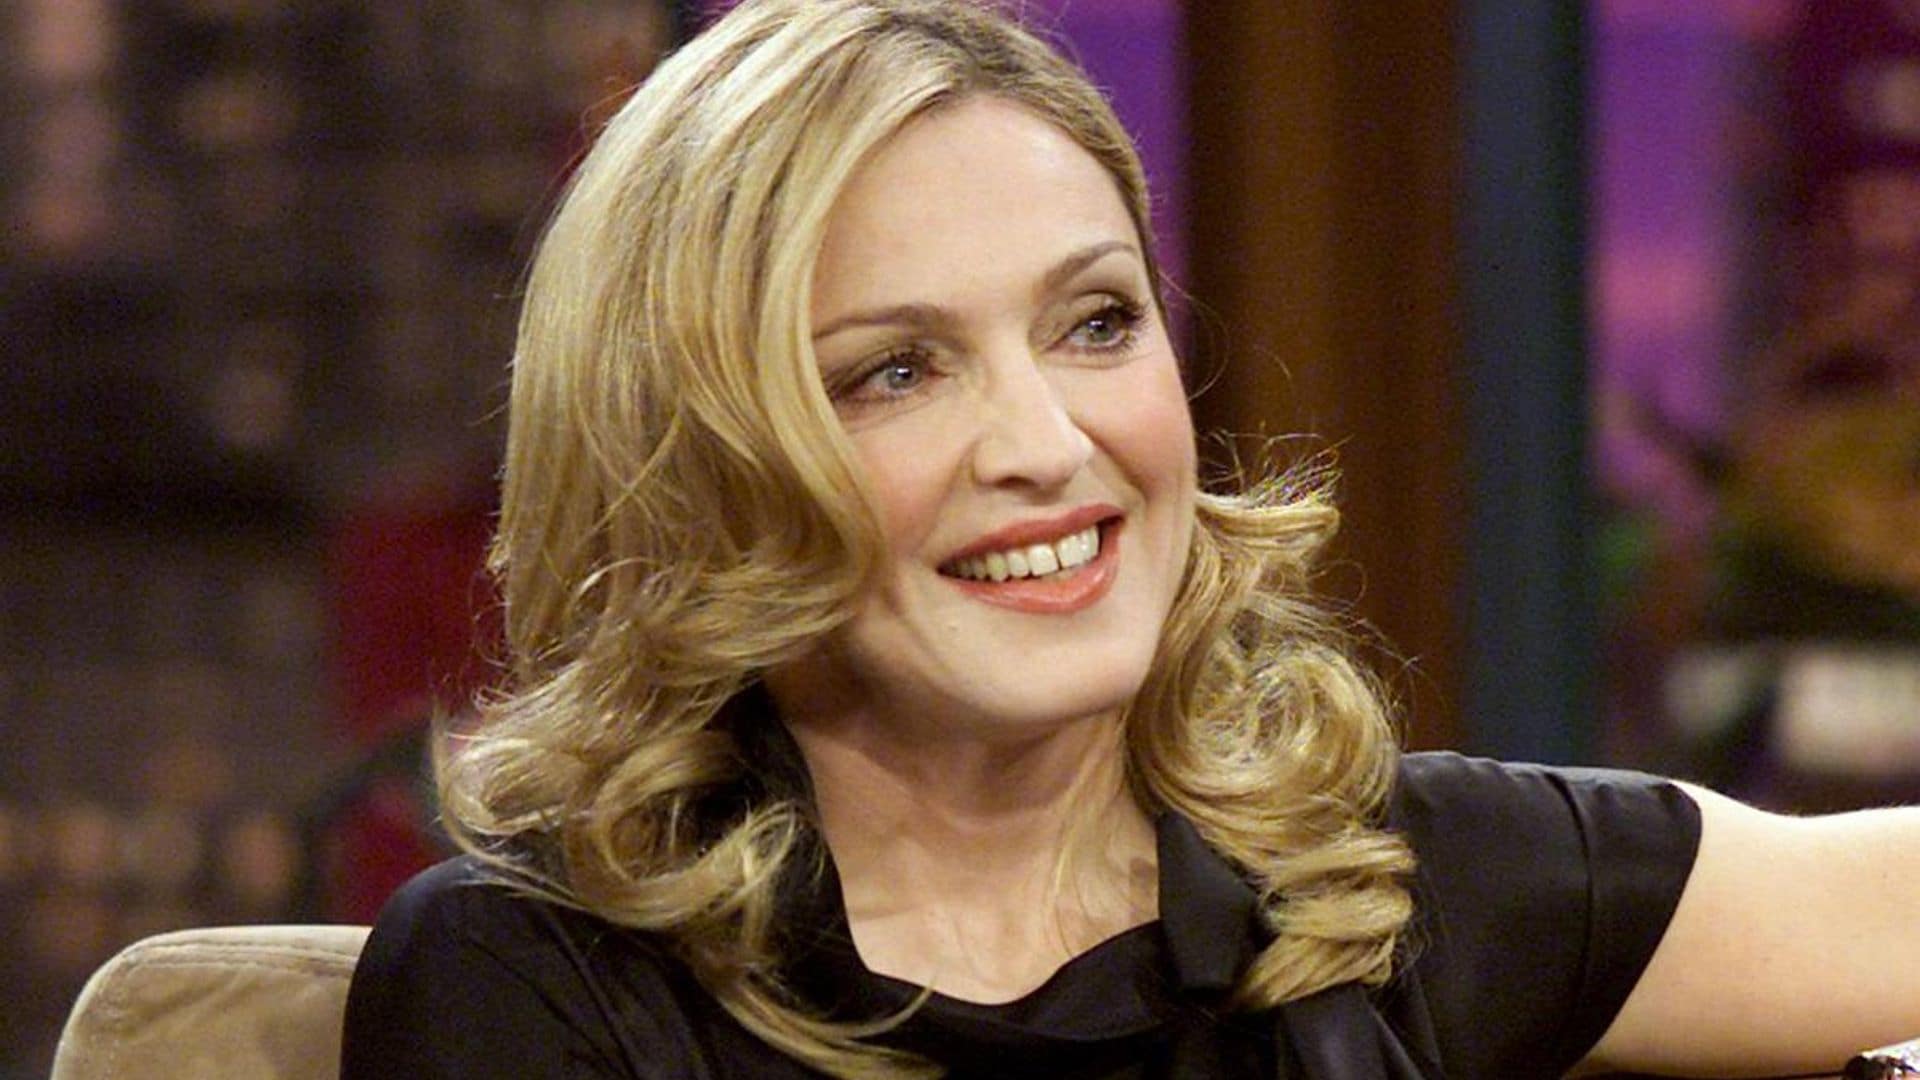 Madonna biopic canceled: The reason behind the project not moving forward